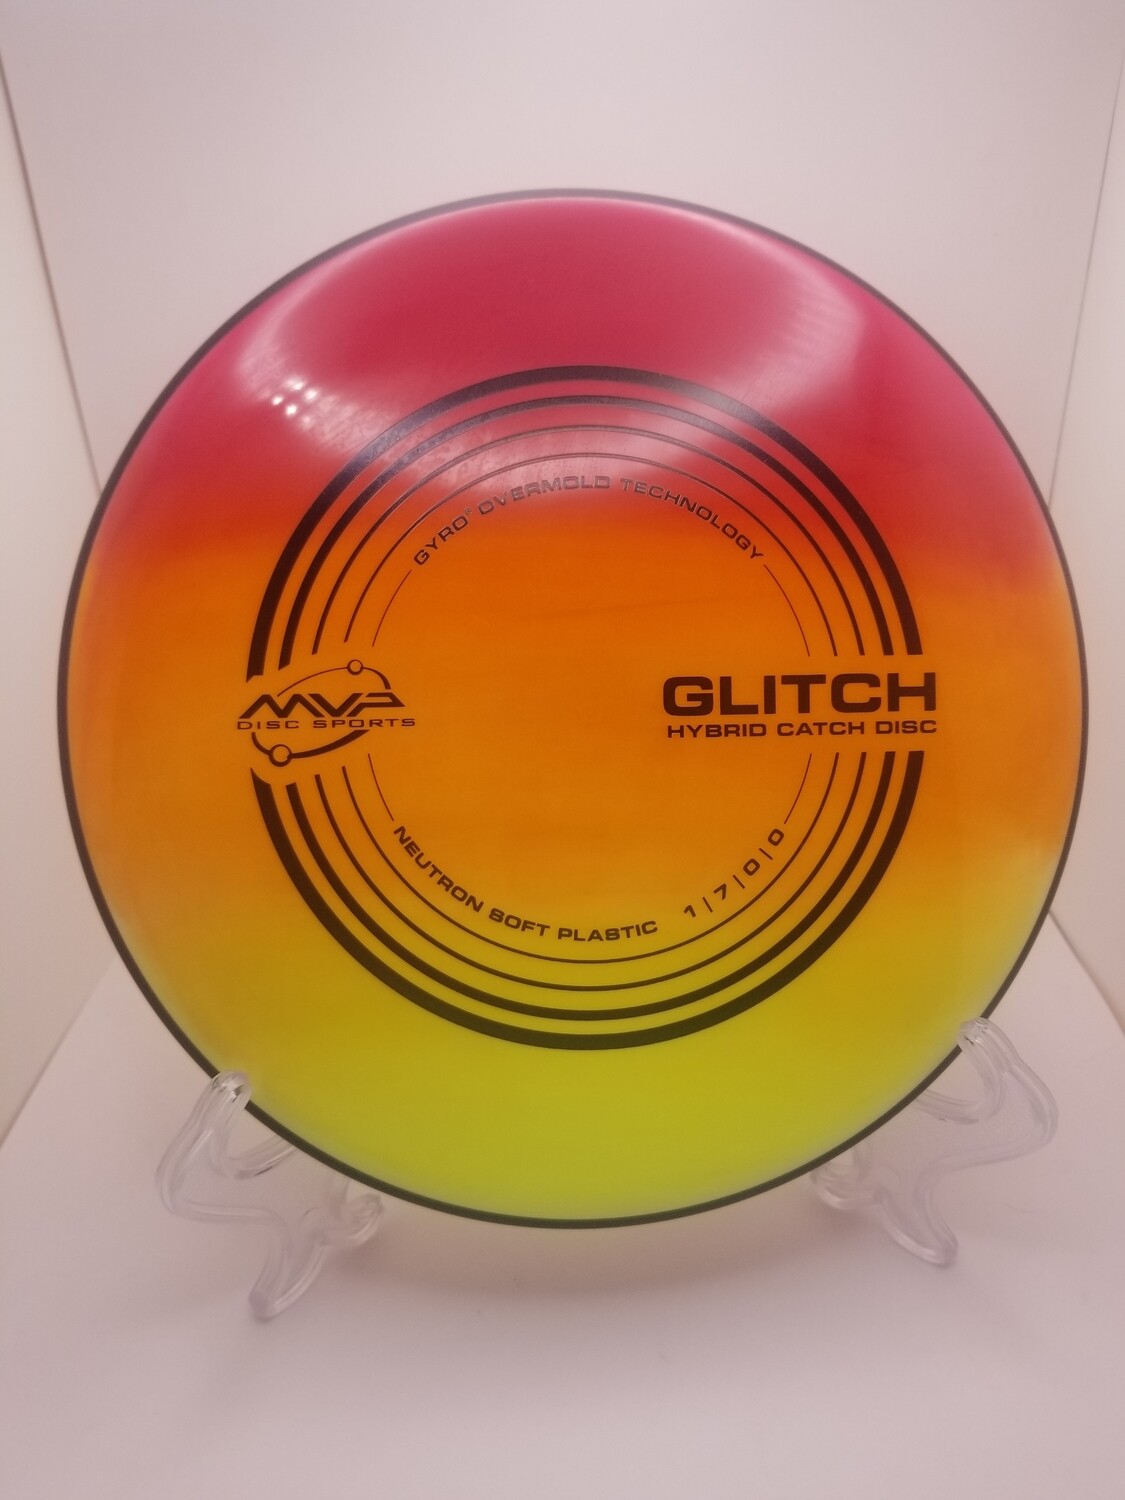 MVP Glitch One of a kind Design Gradient with UV dyes 151g brought to you by Dyelicious Discs. Free Shipping!